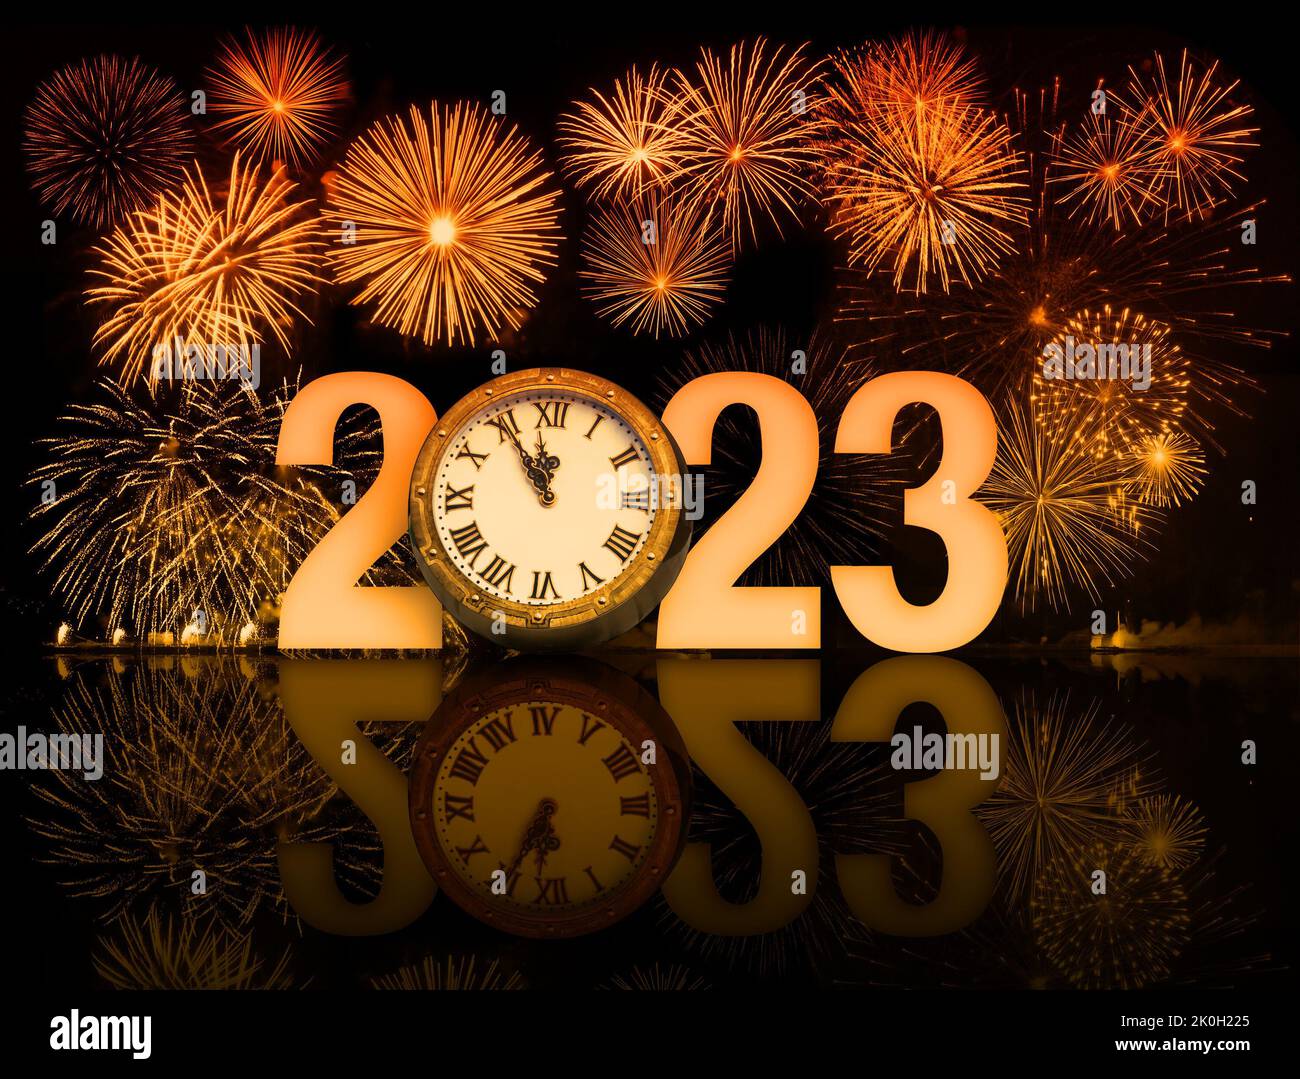 Orange 2023 happy new year fireworks with clock face Stock Photo